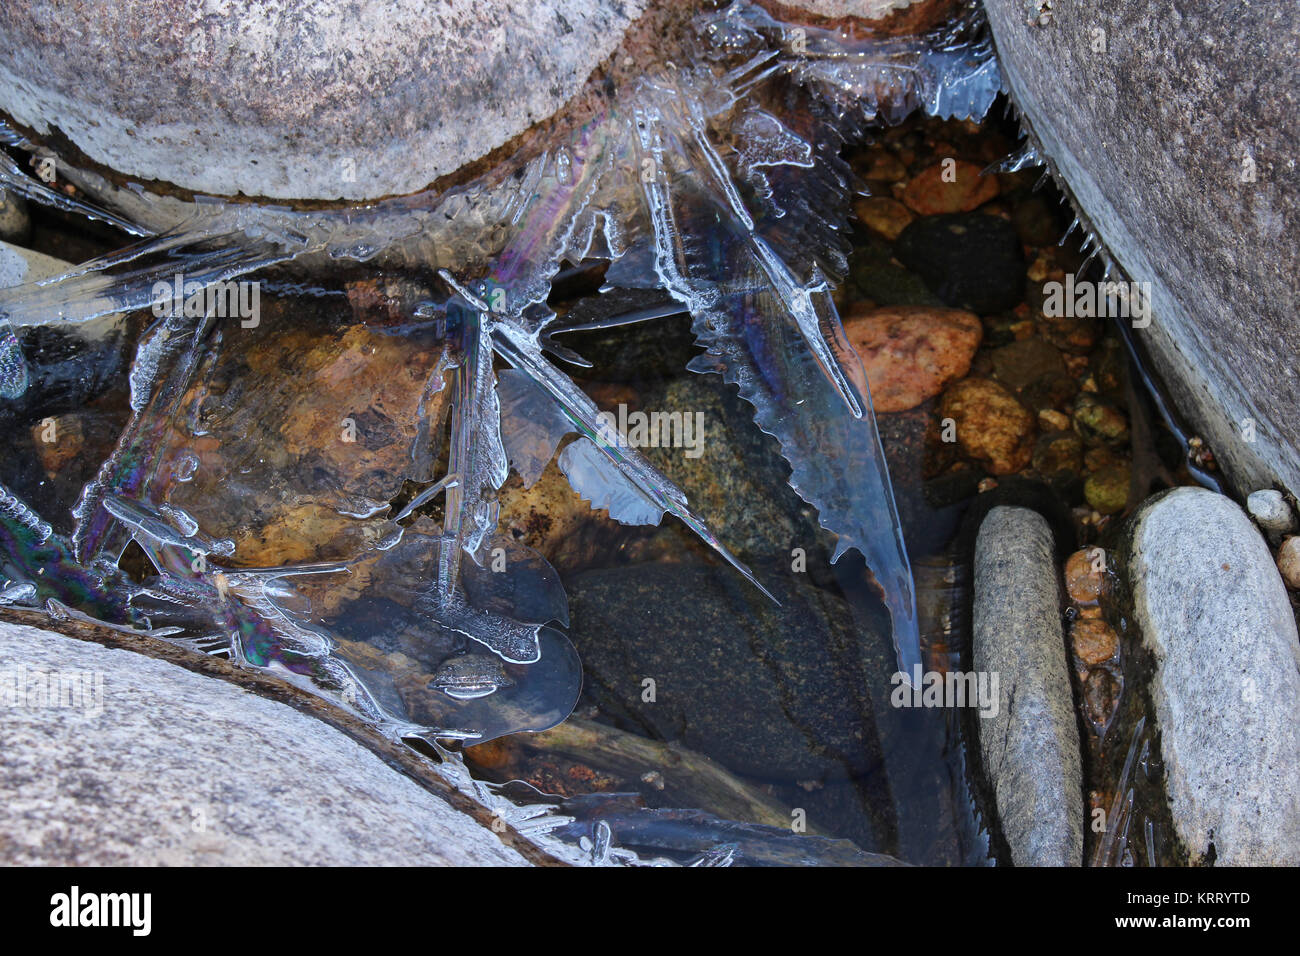 Shards of ice with iridescent sheen grow on river rocks. Stock Photo